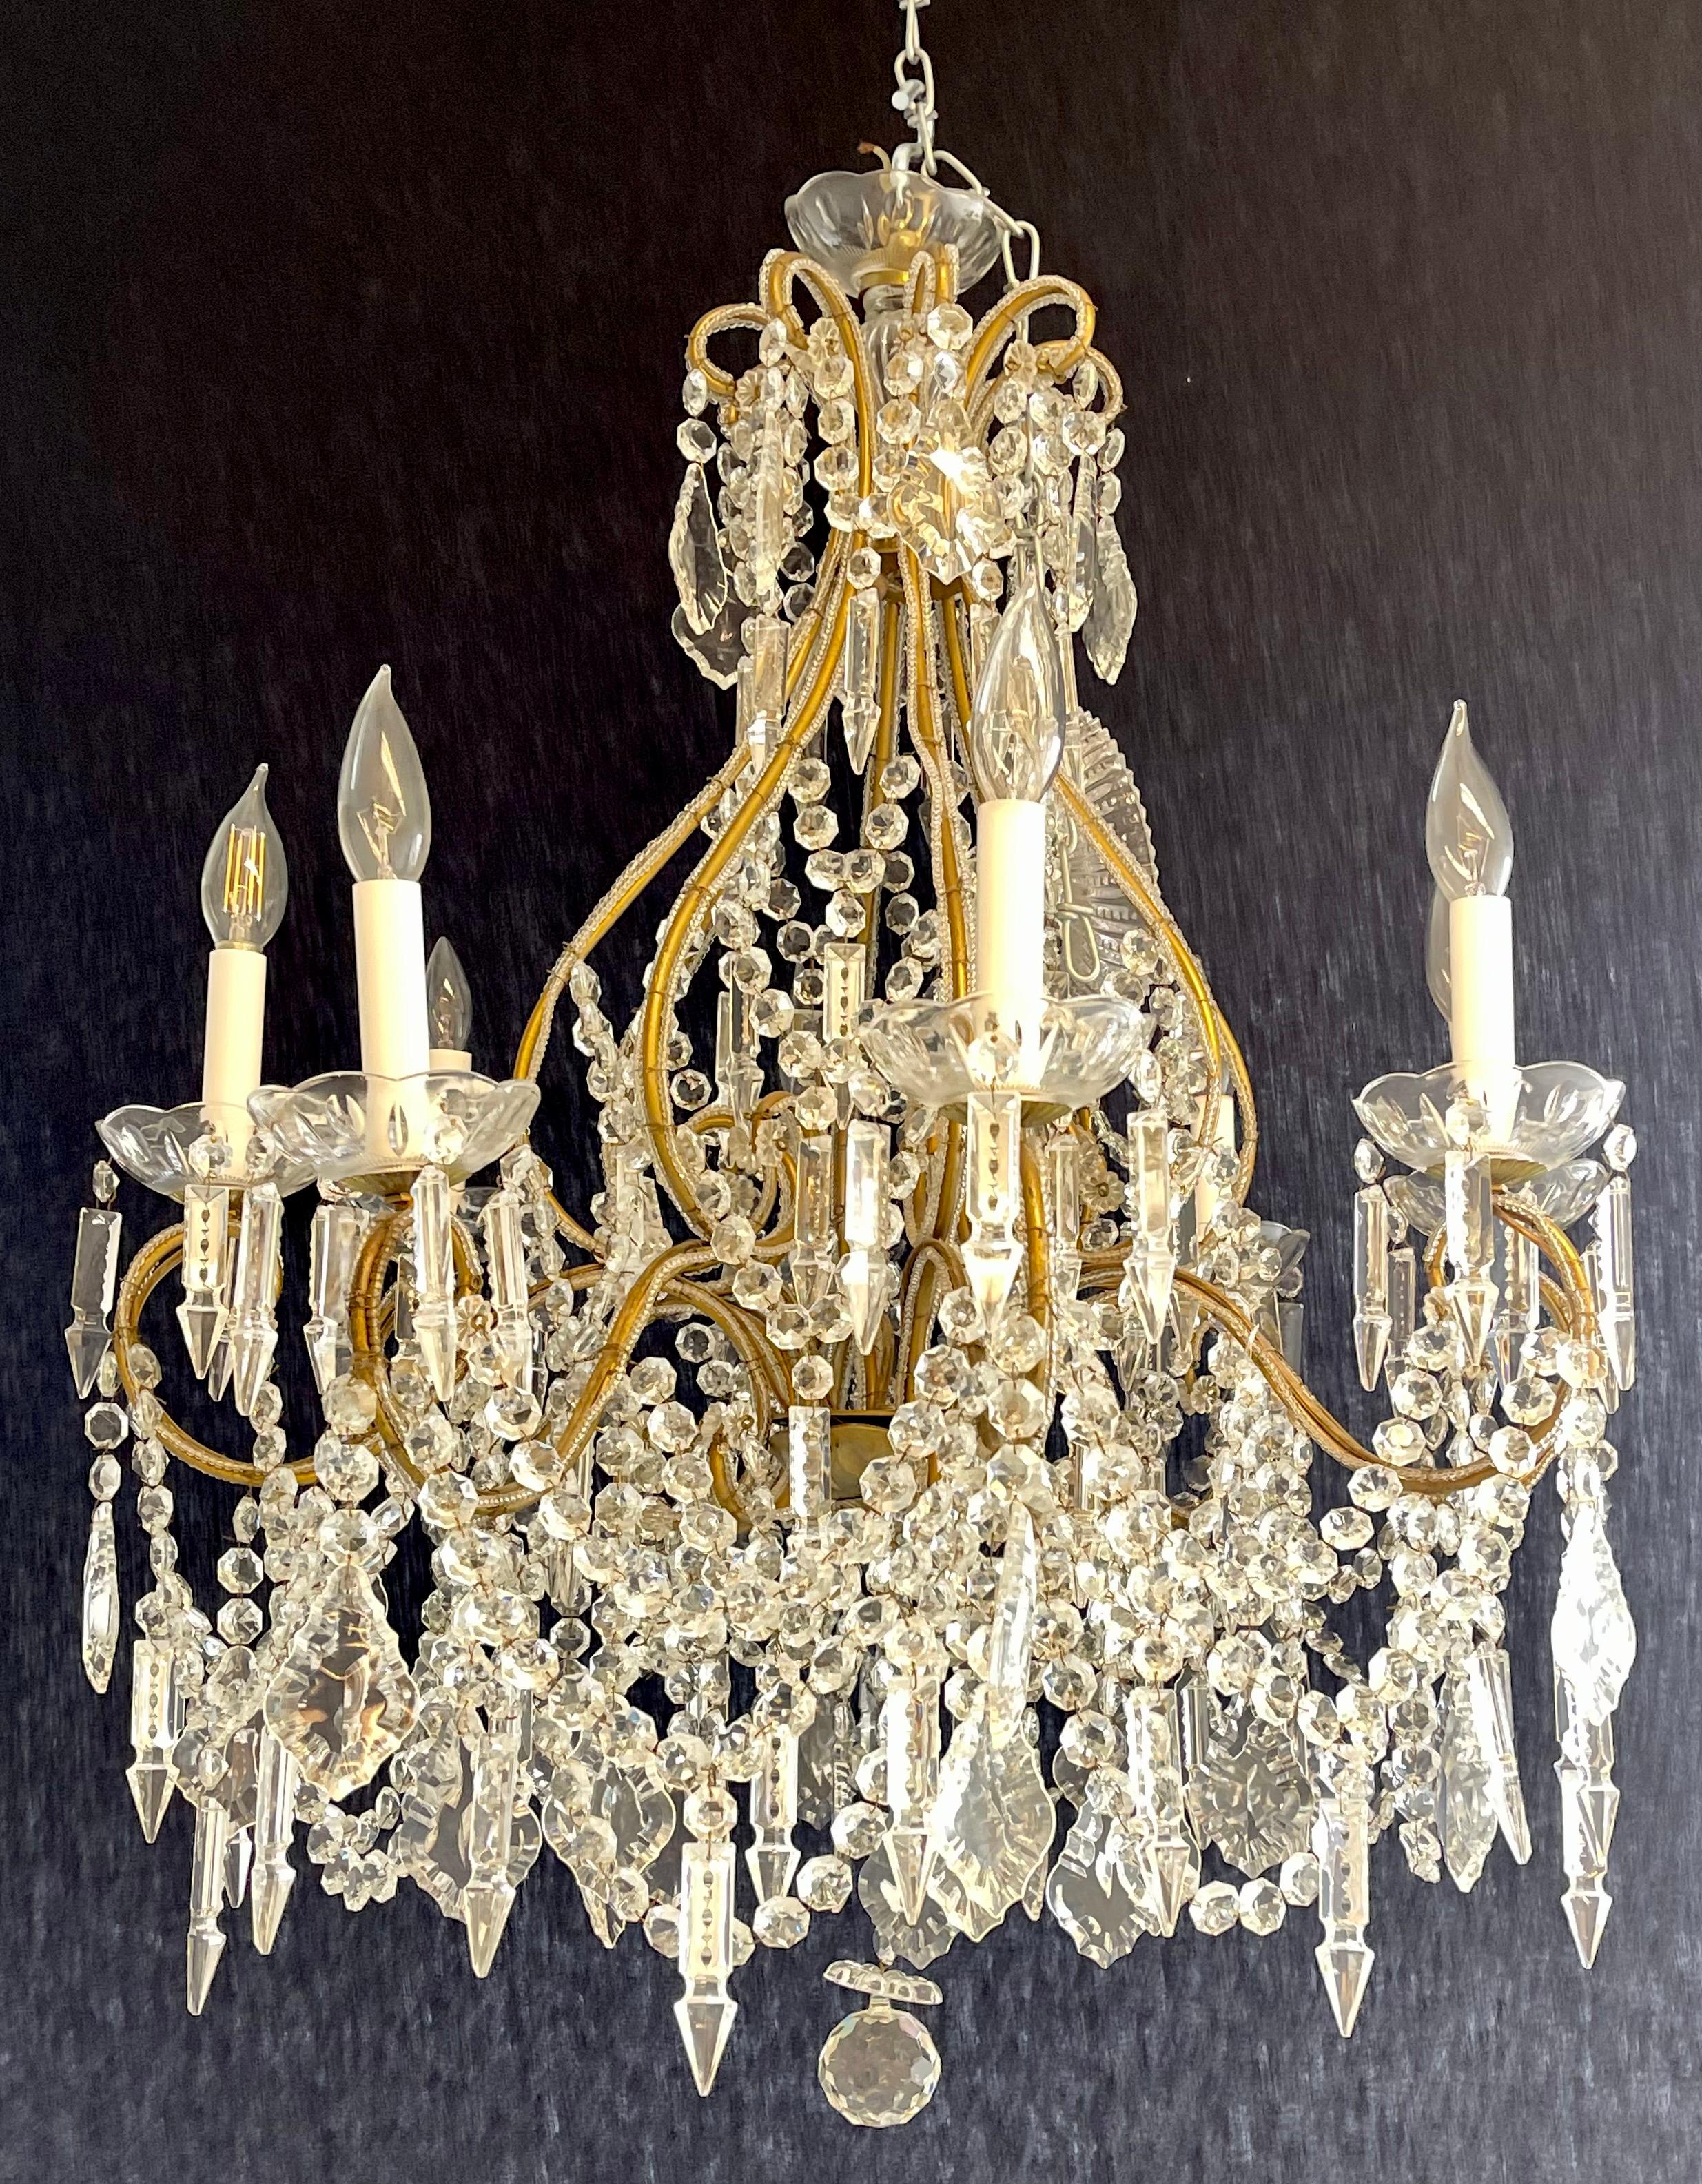 A fine James Moder Crystal Chandelier. Elegant look on this overstated chandelier which is large enough to fit into most settings. 